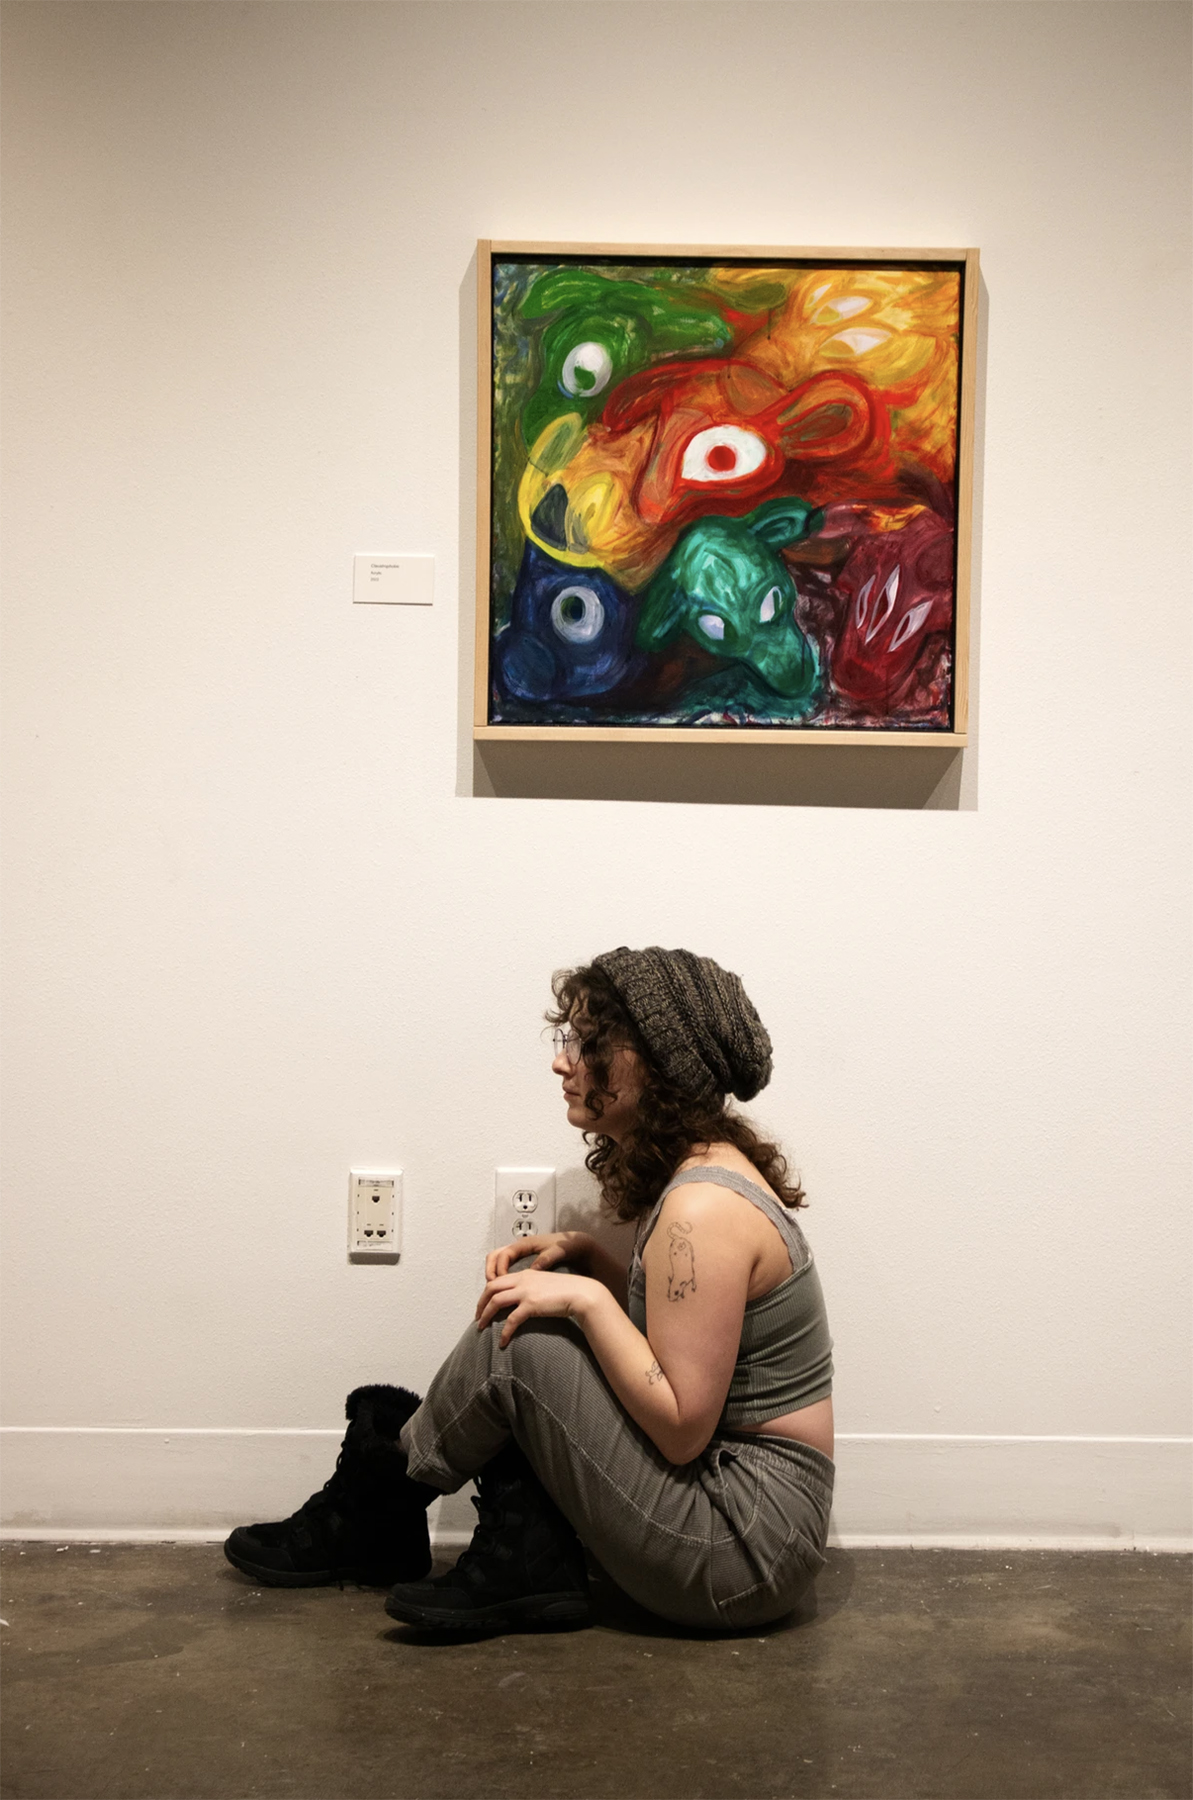 Chana Stern poses under Claustraphobic at the reception for "Pilgrimage of the Revenant", courtesy of the artist